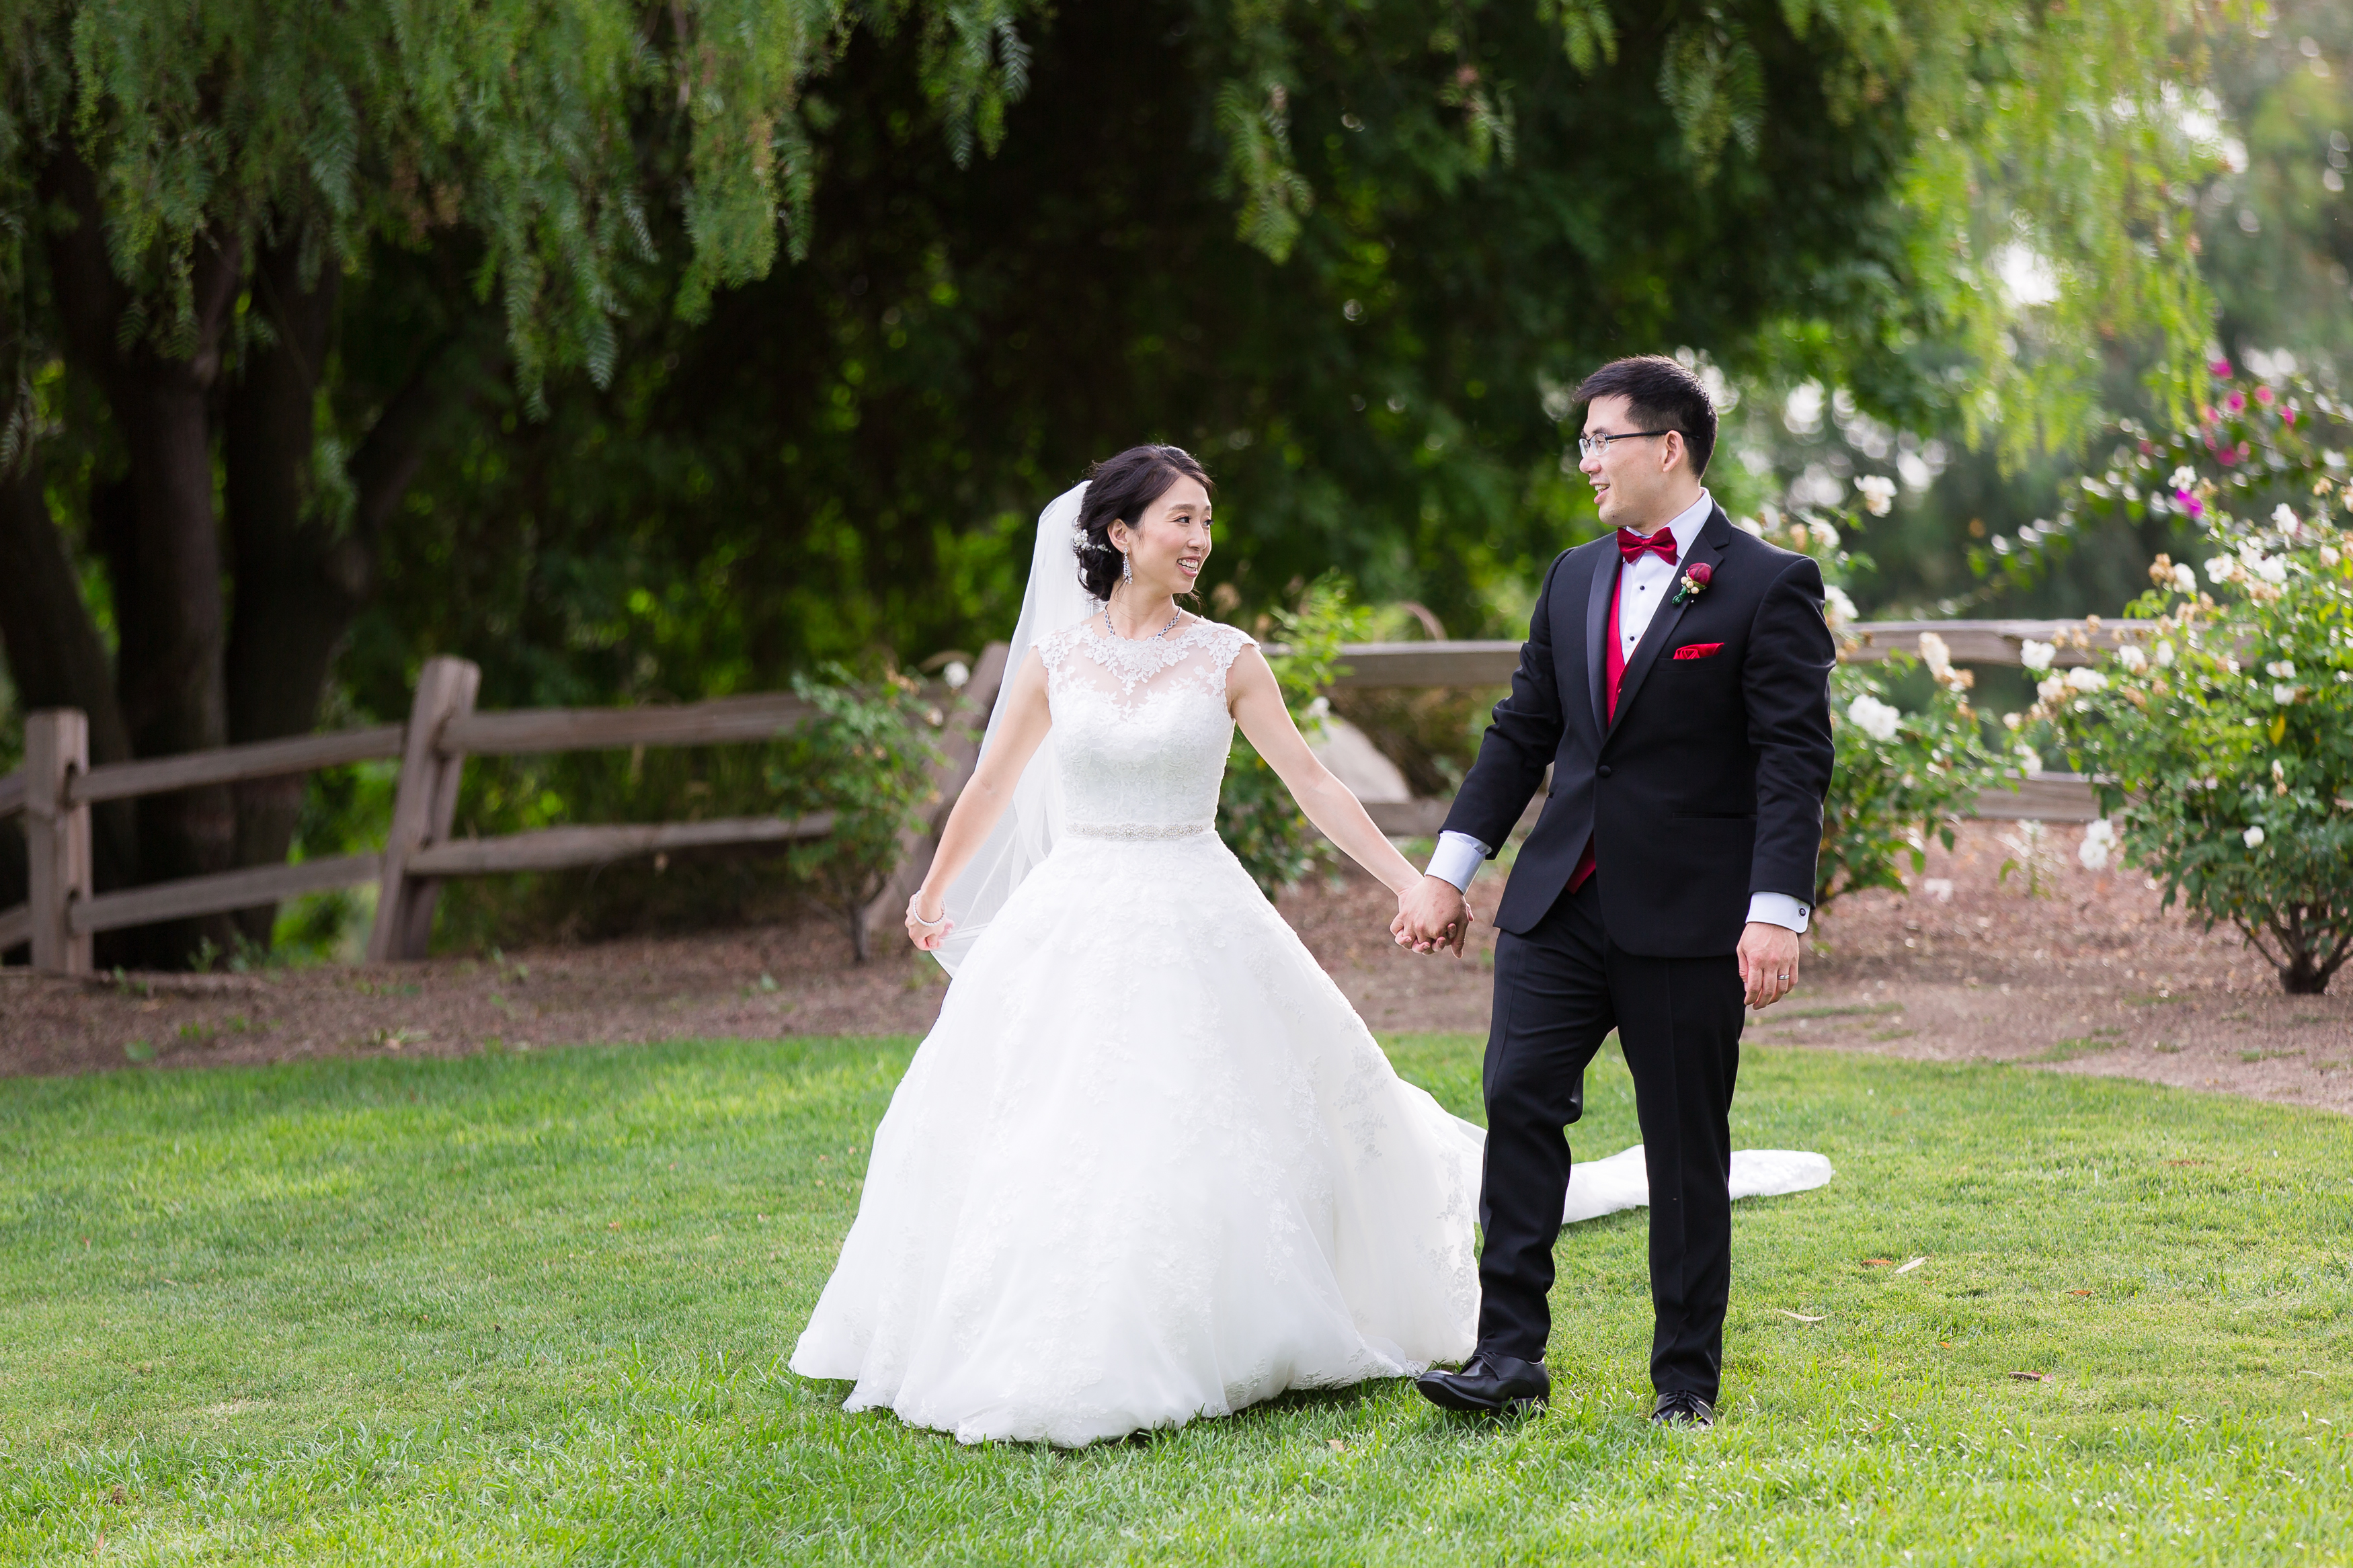 Wedding couple walking hand in hand laughing towards each other